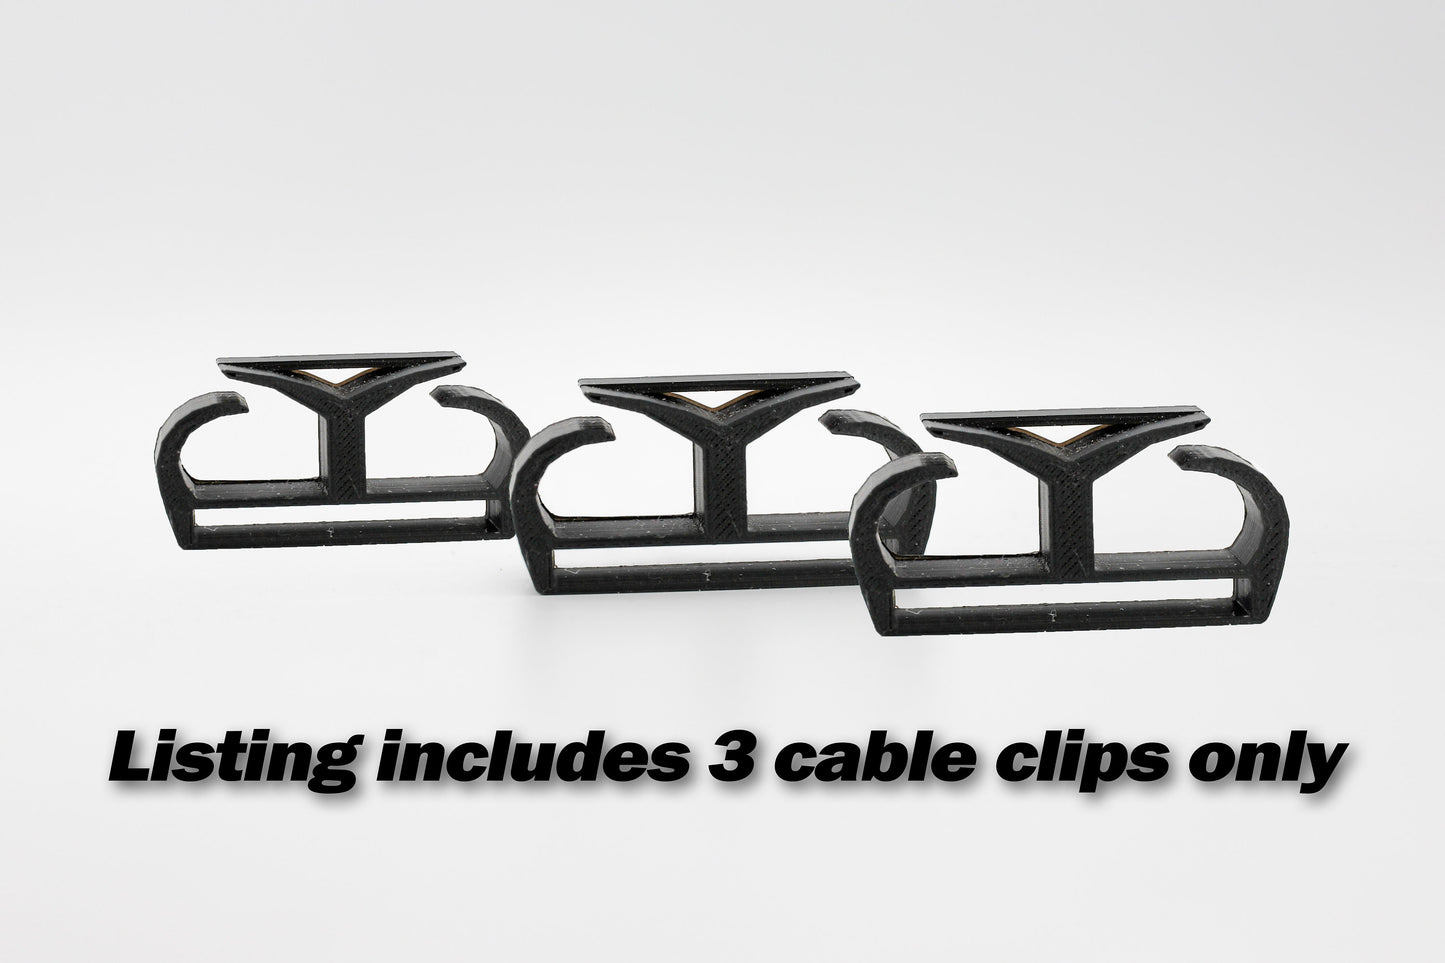 Set of 3 Cable Management Clips for the Meta Quest with the HTC Vive DAS mod. Includes a 6-month warranty!